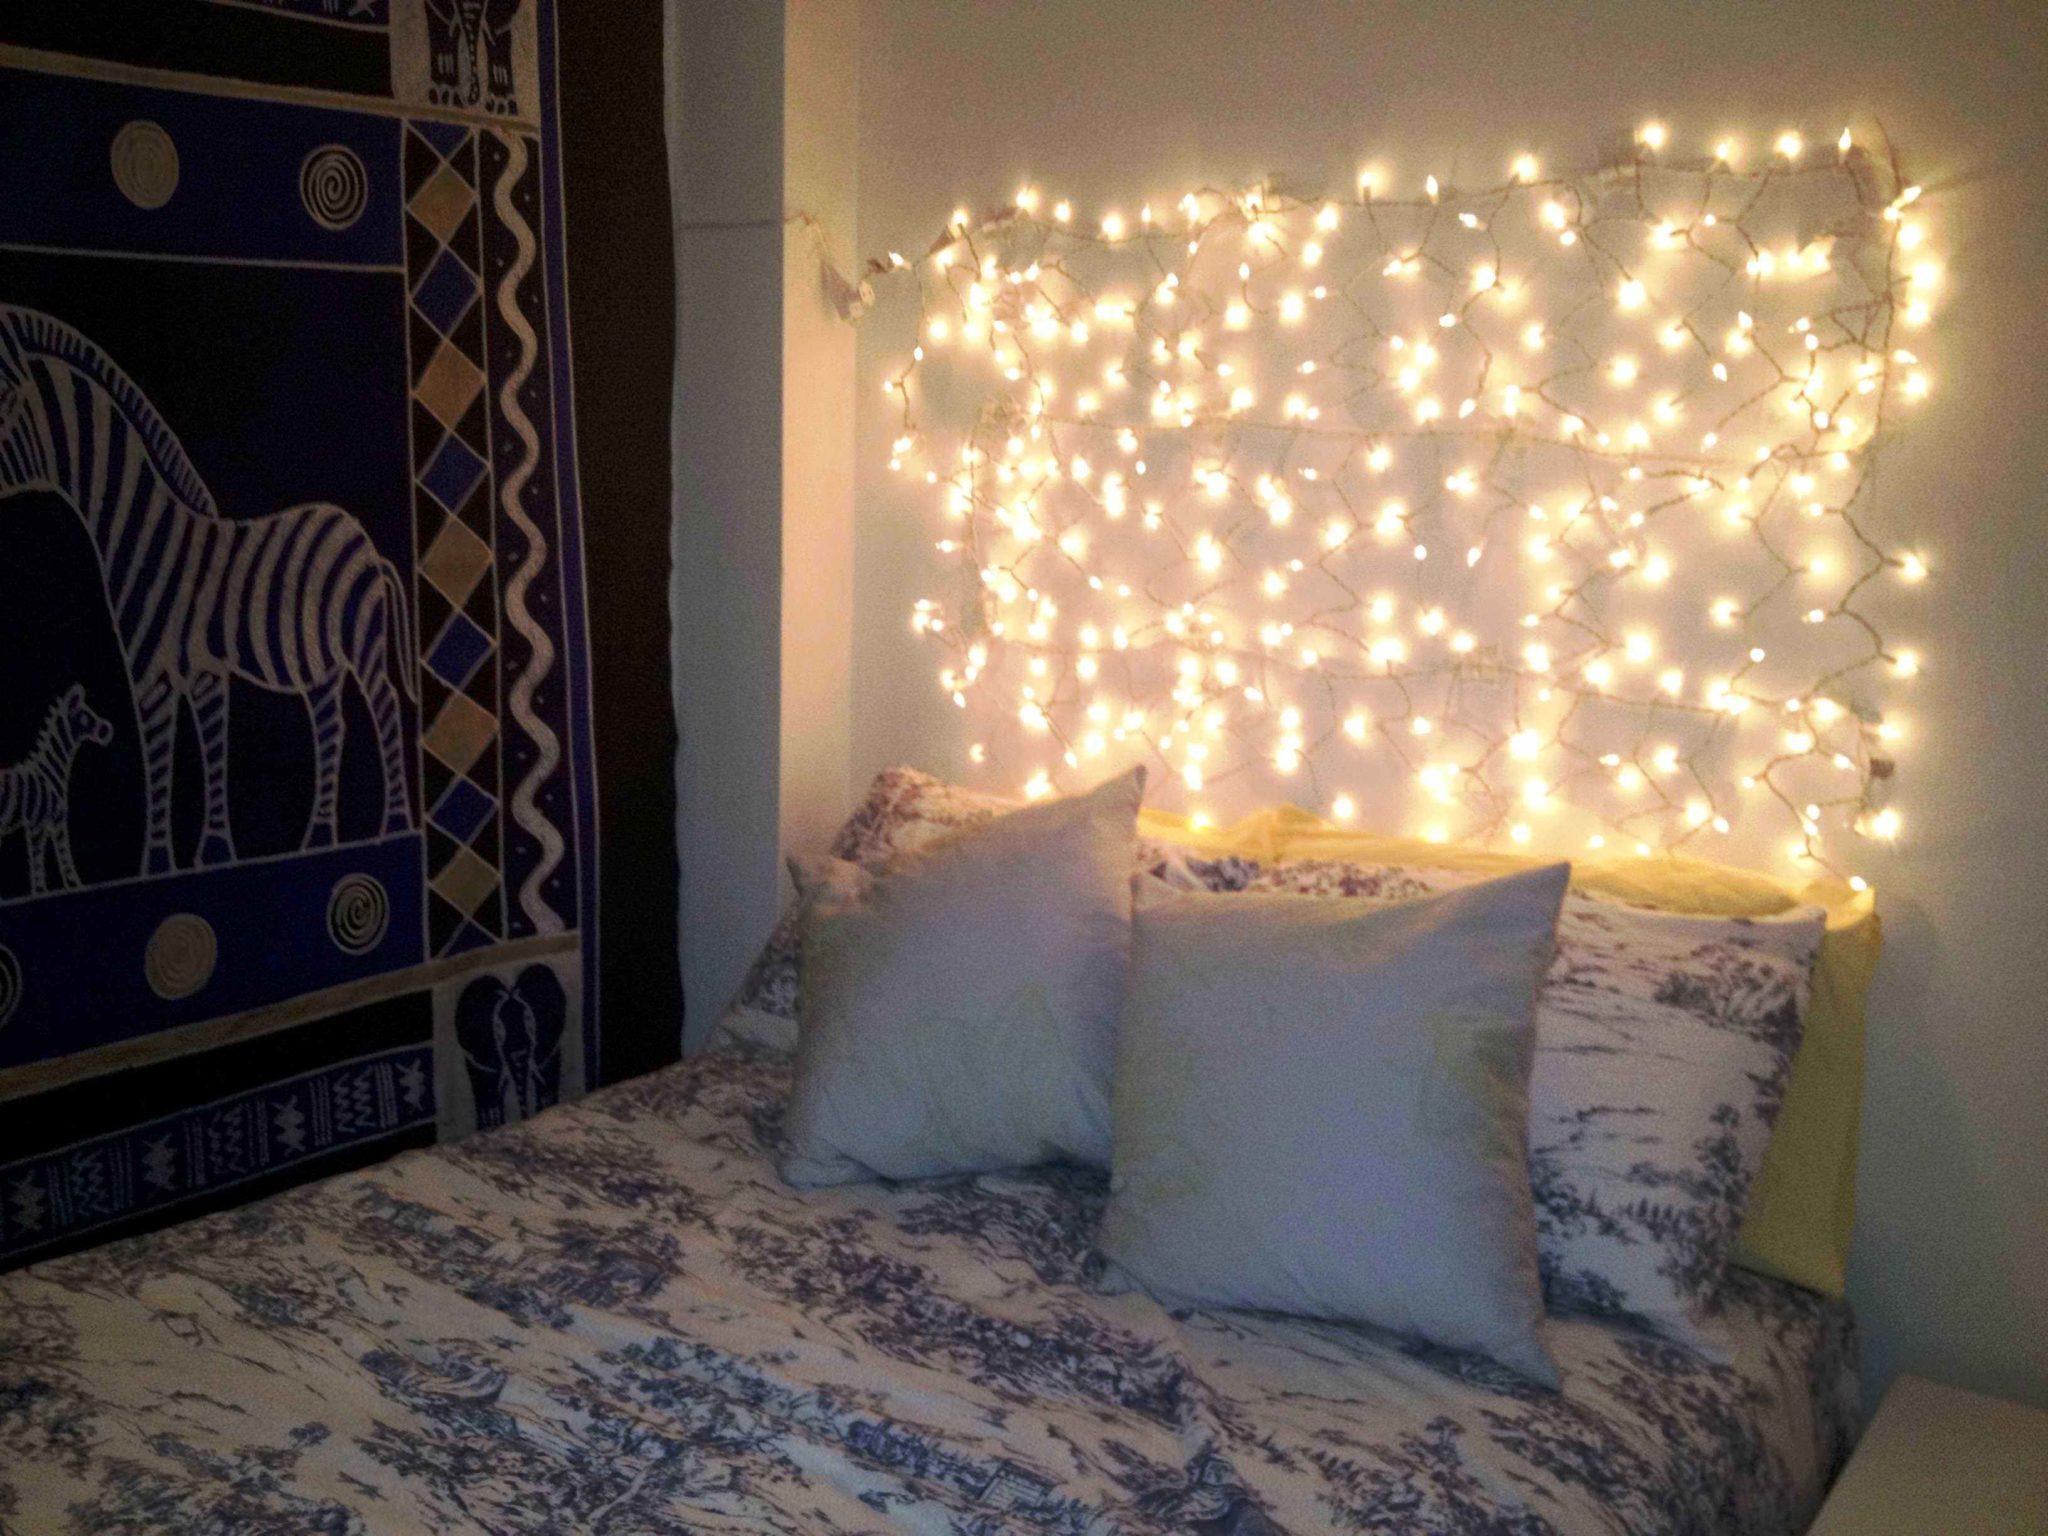 String-lights-in-the-place-of-a-headboard